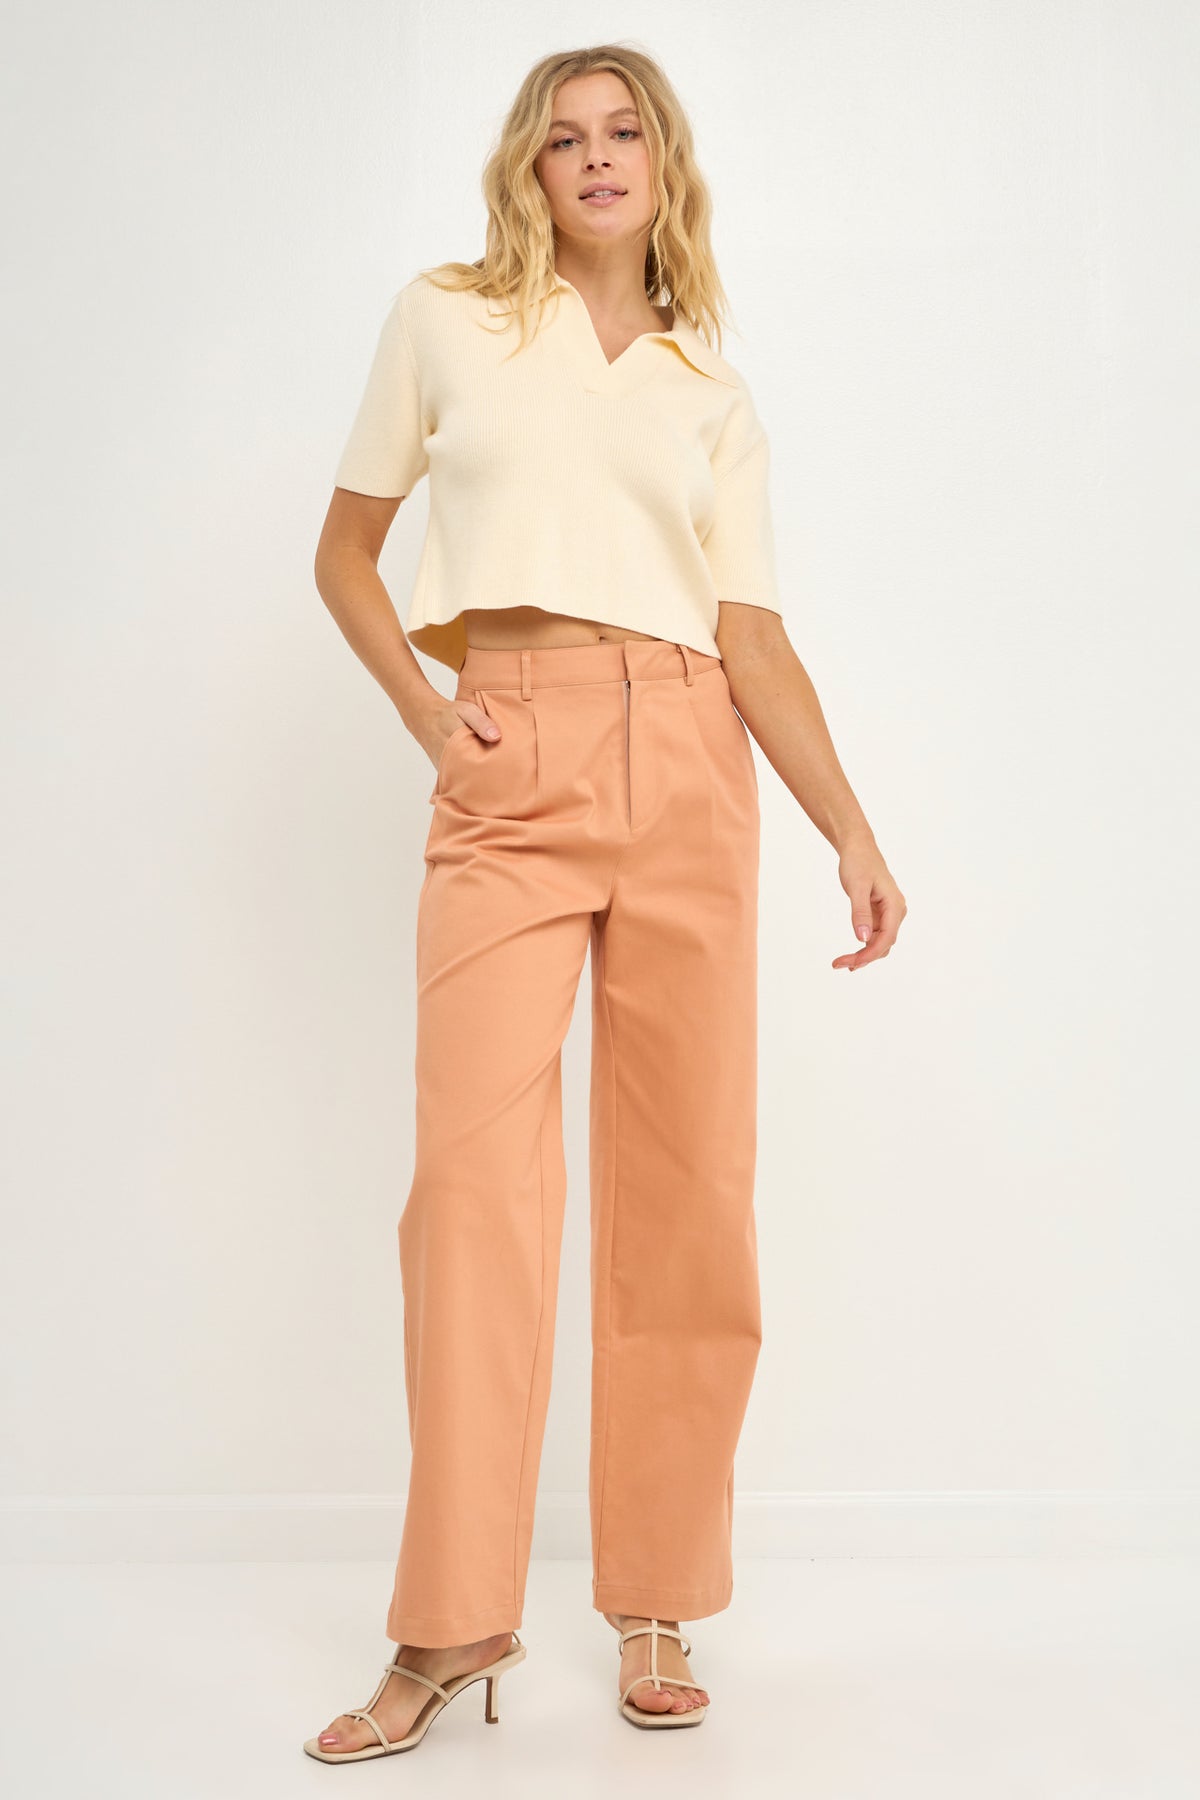 FREE THE ROSES - Relaxed Pleated Trouser Pants - PANTS available at Objectrare